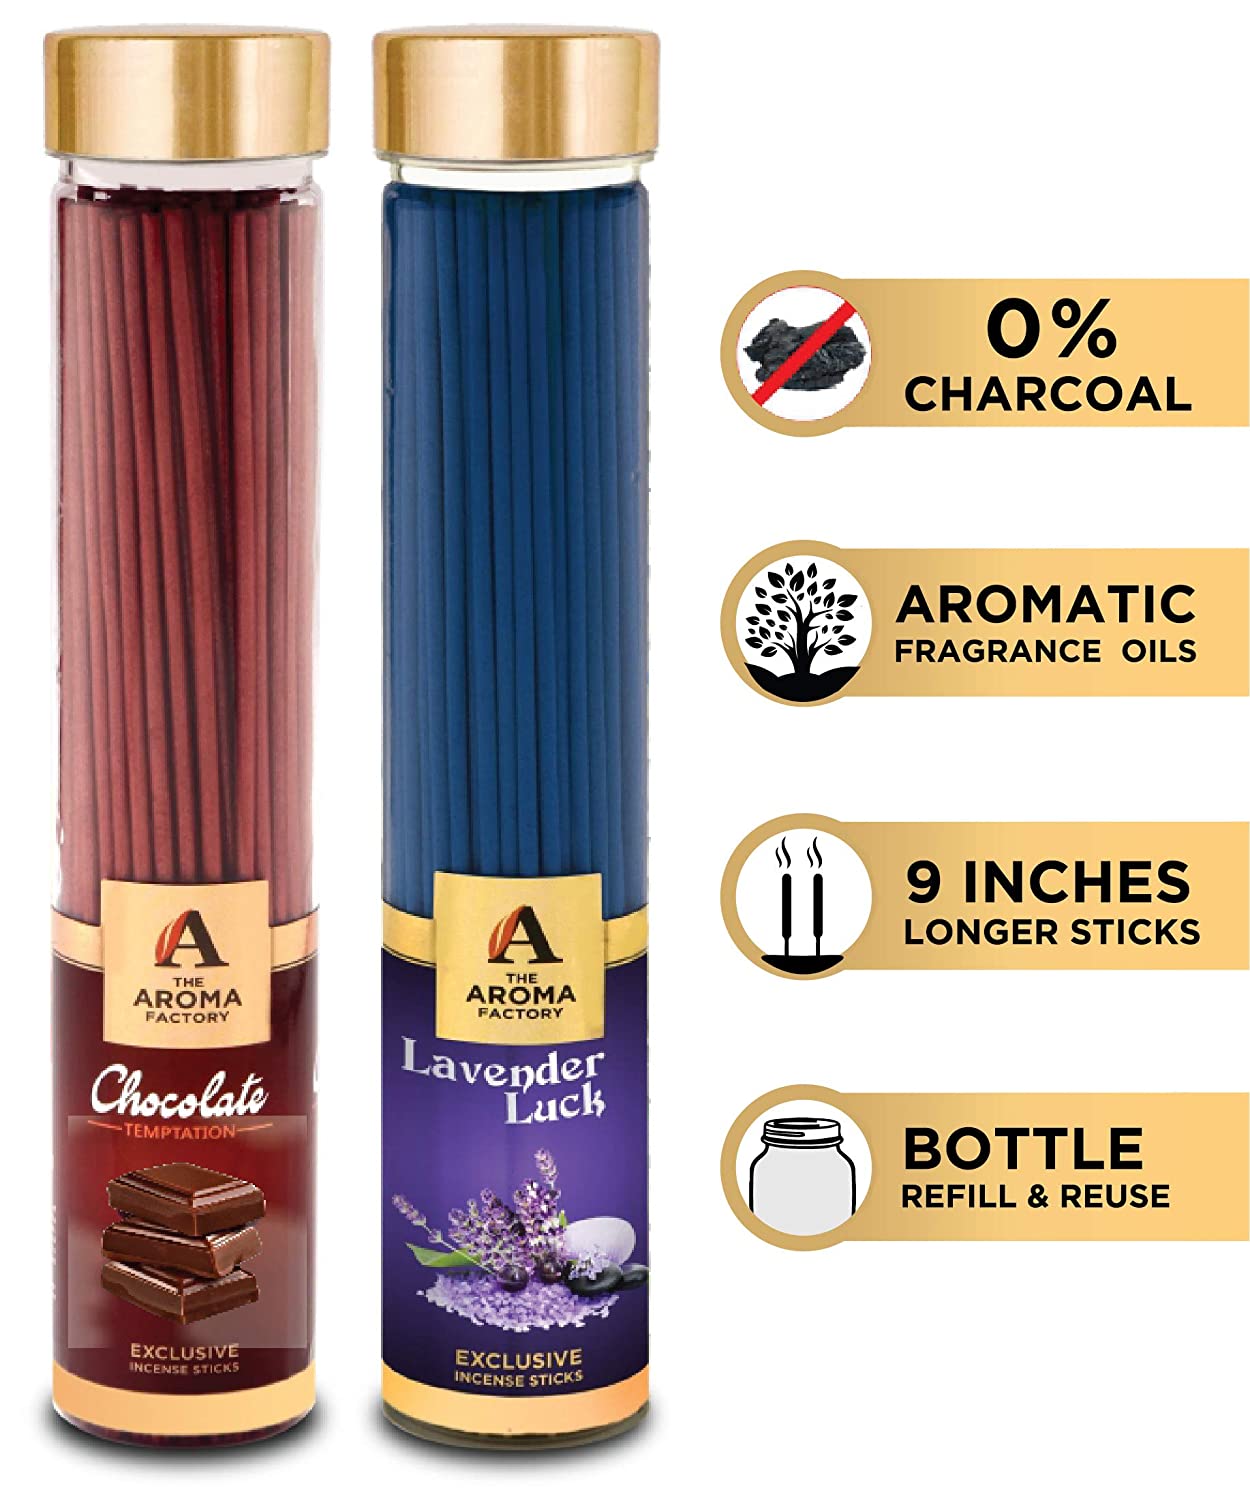 The Aroma Factory Chocolate & Lavender Luck Agarbatti (Charcoal Free & Low Smoke) Bottle Pack of 2 x 100